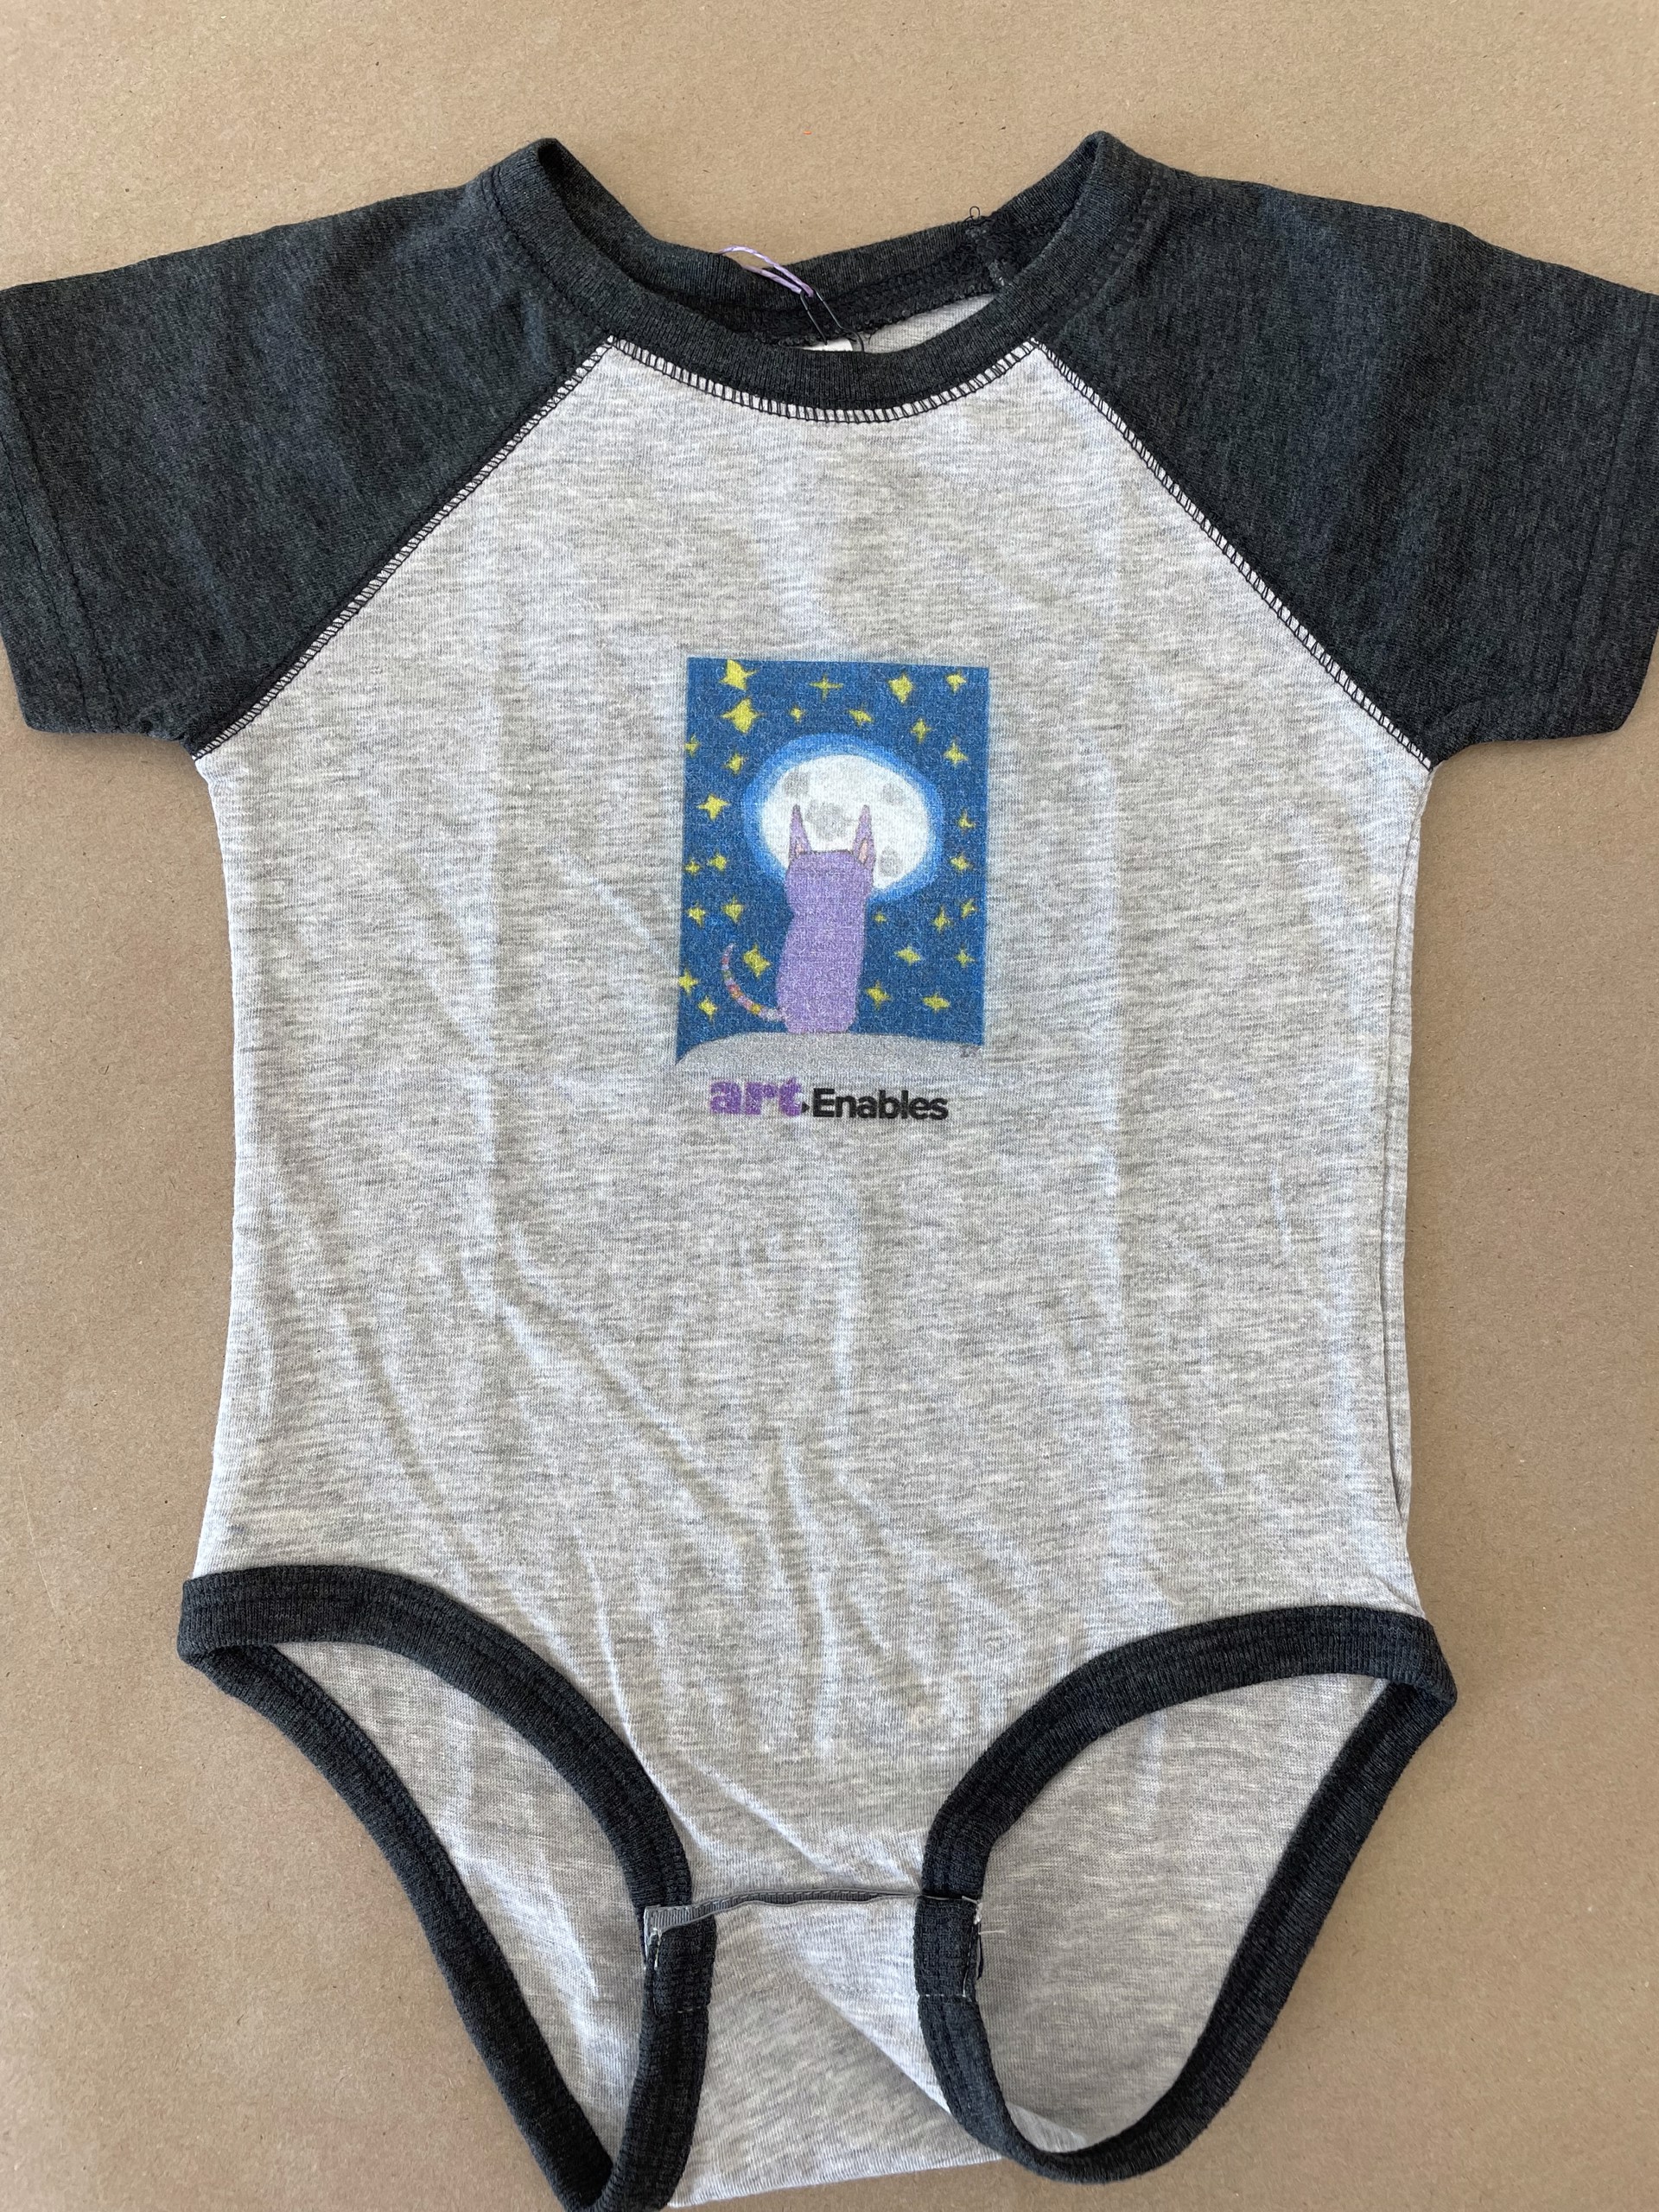 Baby Onesie (baseball style, artwork by Imani Turner) 18 mo - charcoal heather gray by Art Enables Merchandise